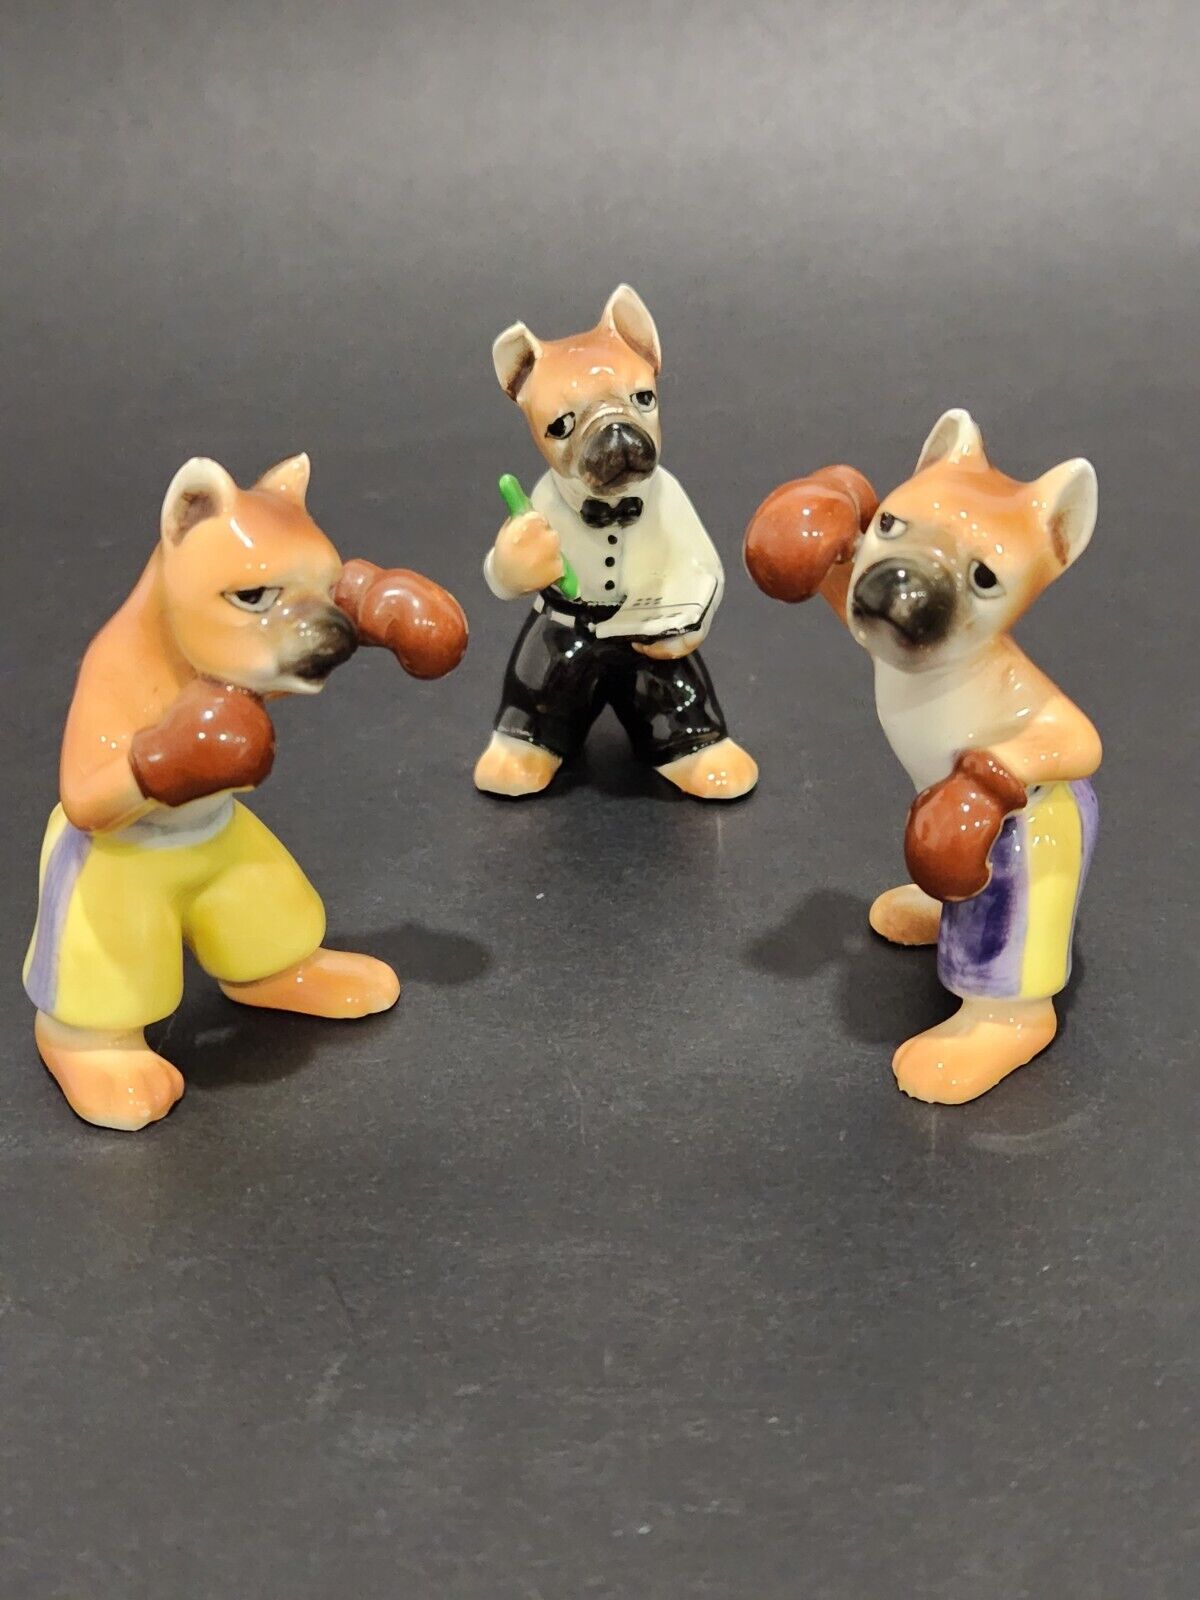 Vtg Miniature Ceramic Figurines - 2 Boxing Boxer Dogs & 1 Waiter - Made in Japan